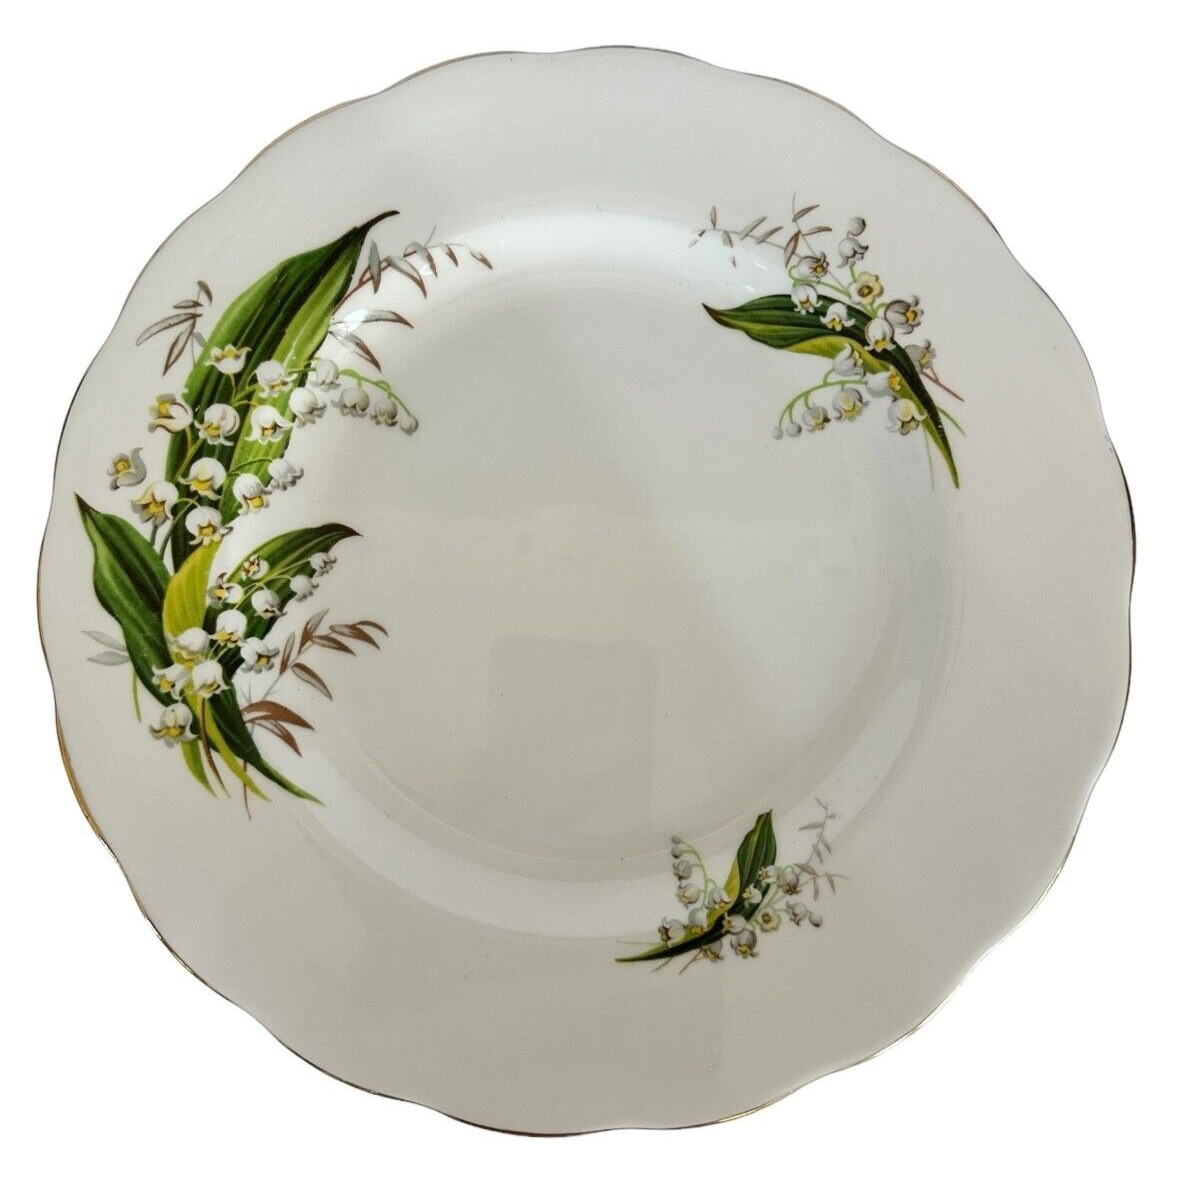 MELBA BONE CHINA ENGLAND  LILY OF THE VALLEY PATTERN DINNER PLATES - SET OF 11